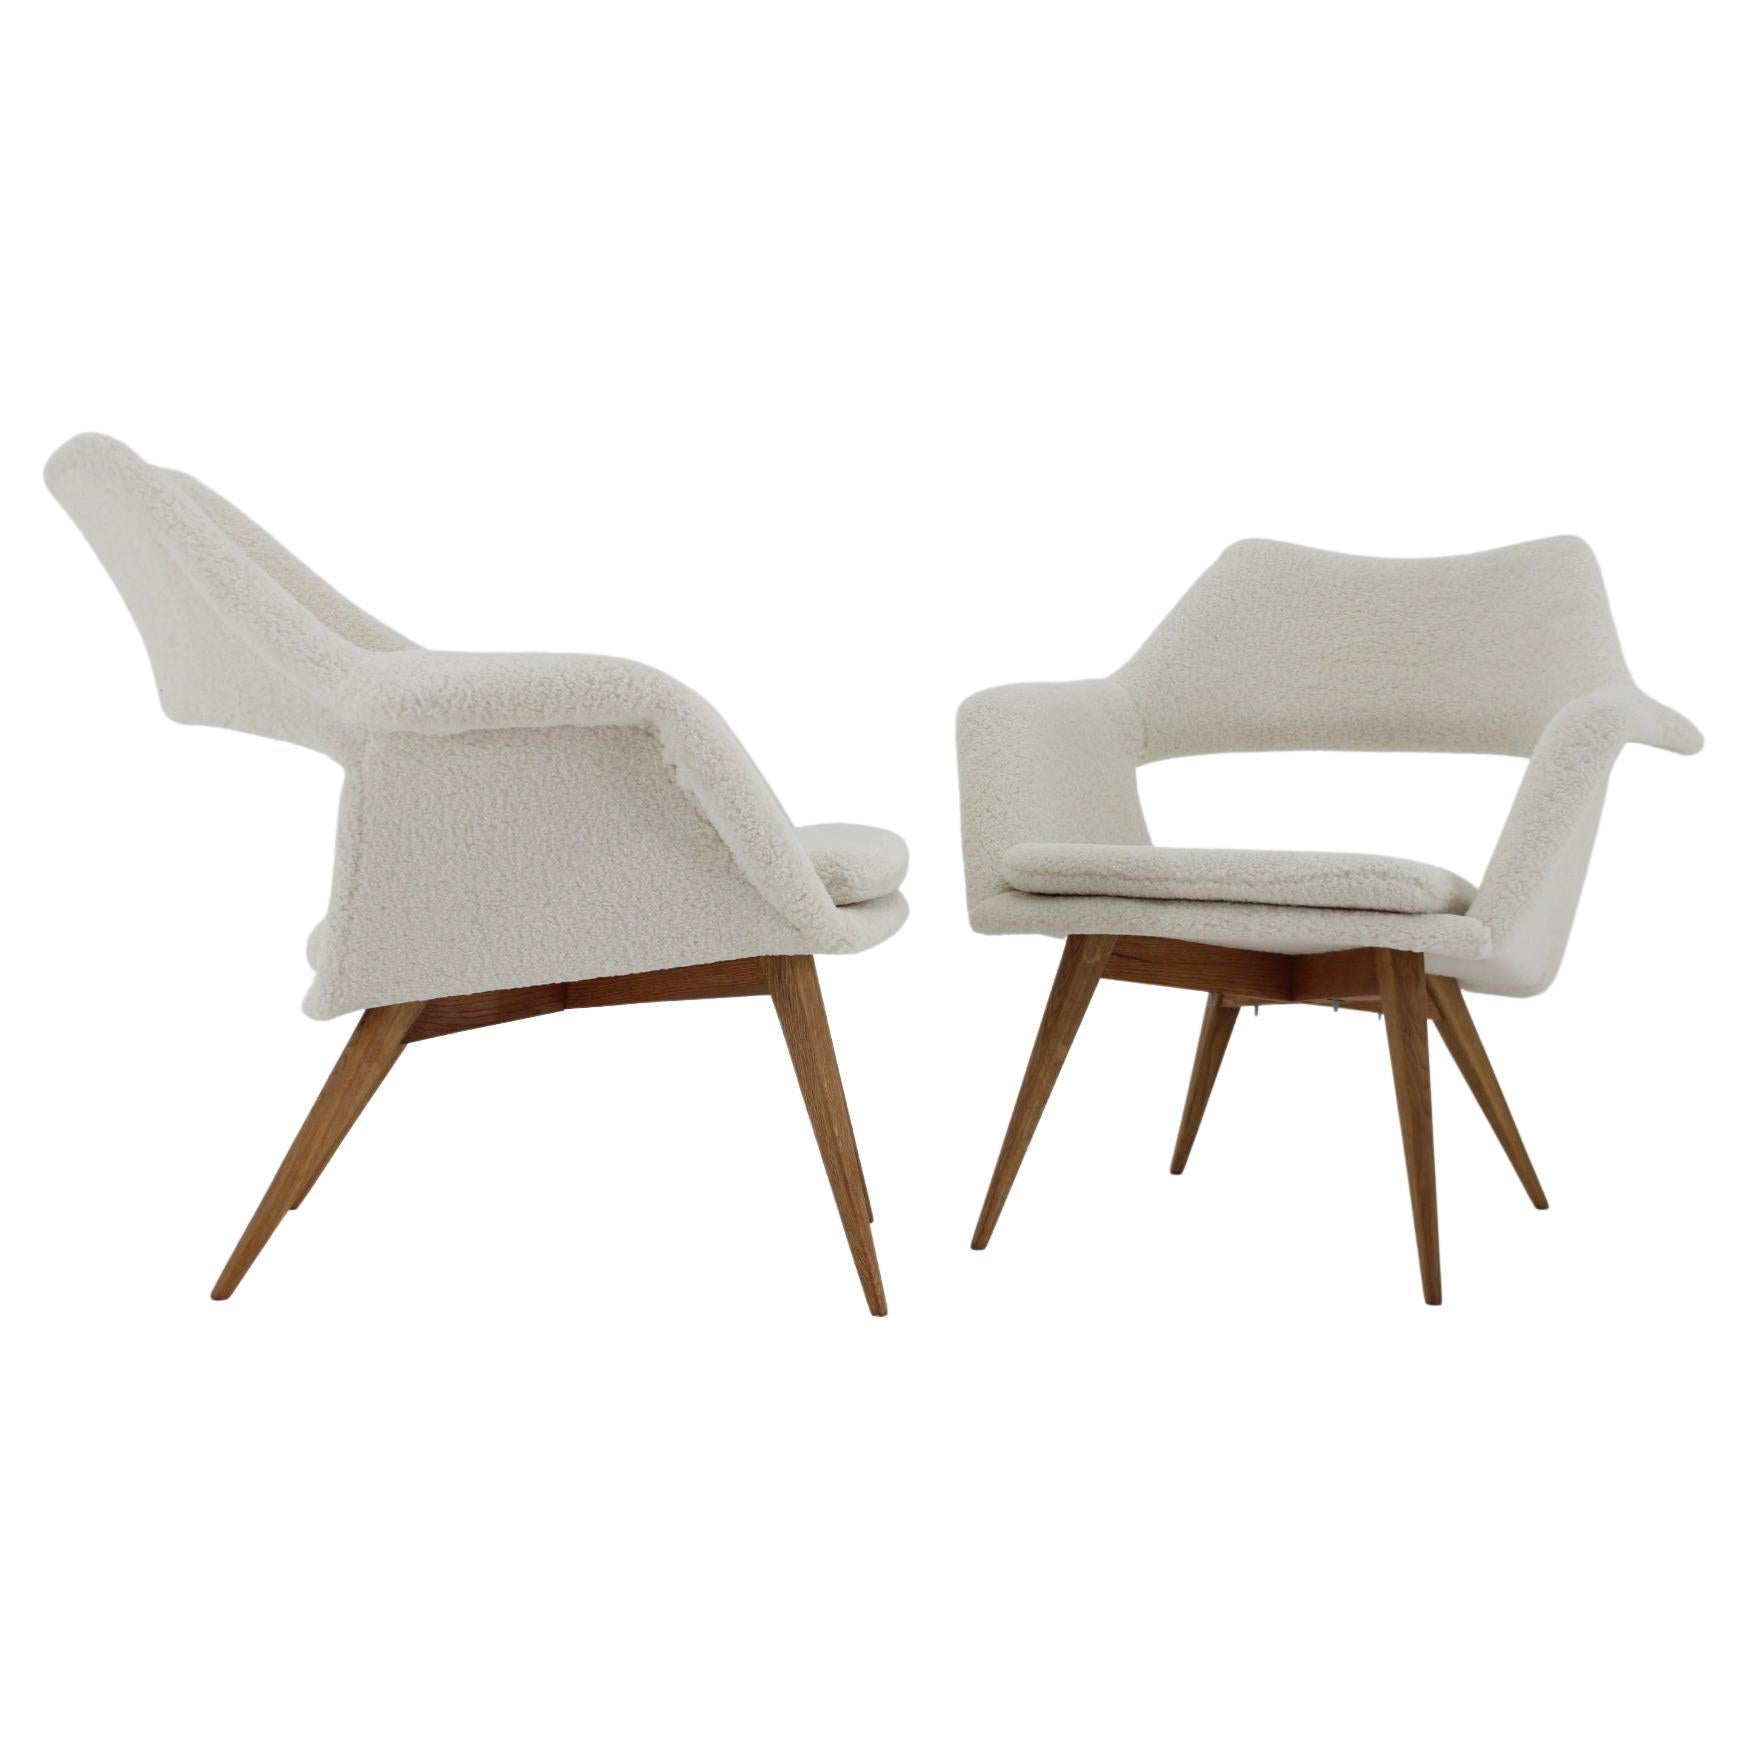 1960s Pair of  Rare Miroslav Navratil Shell Lounge Chairs in Sheepskin Fabric, C For Sale